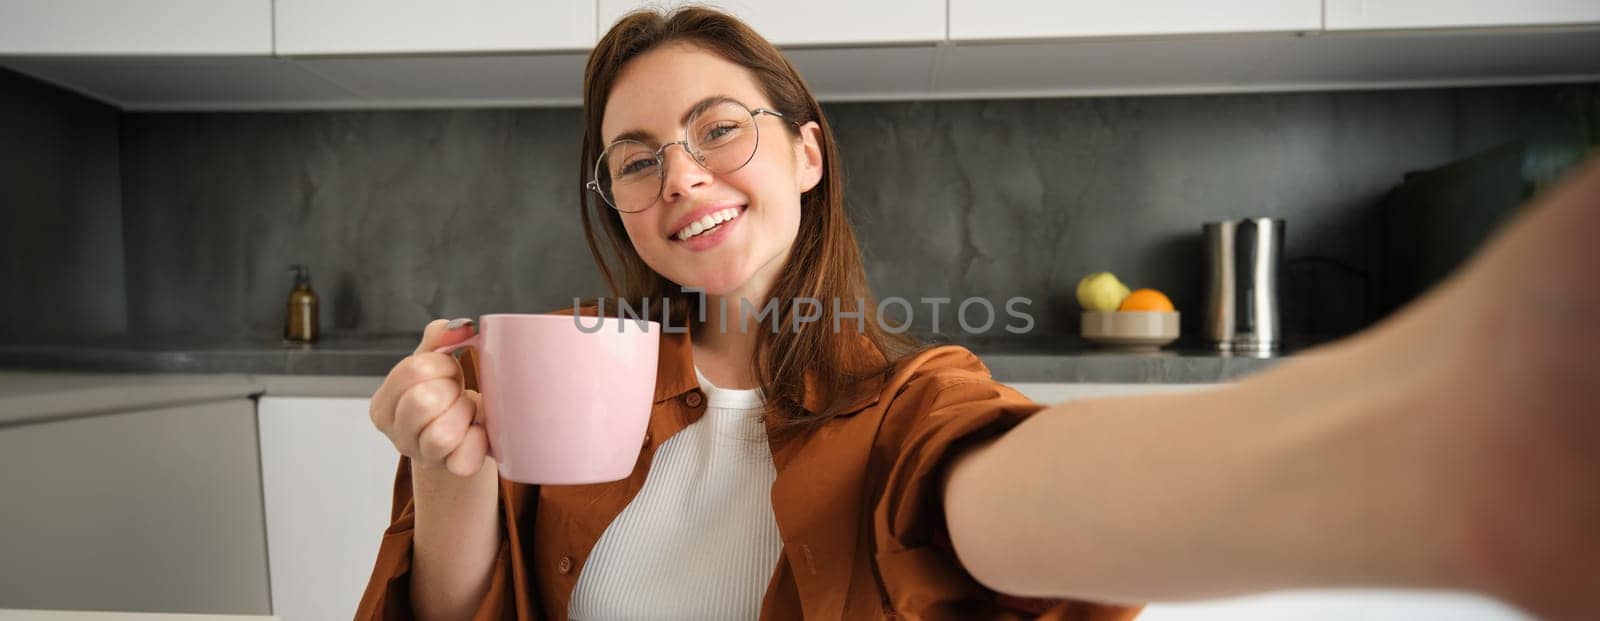 Portrait of happy young woman in glasses, takes selfie with smartphone, drinks coffee, posing with delicious mug of tea in kitchen.